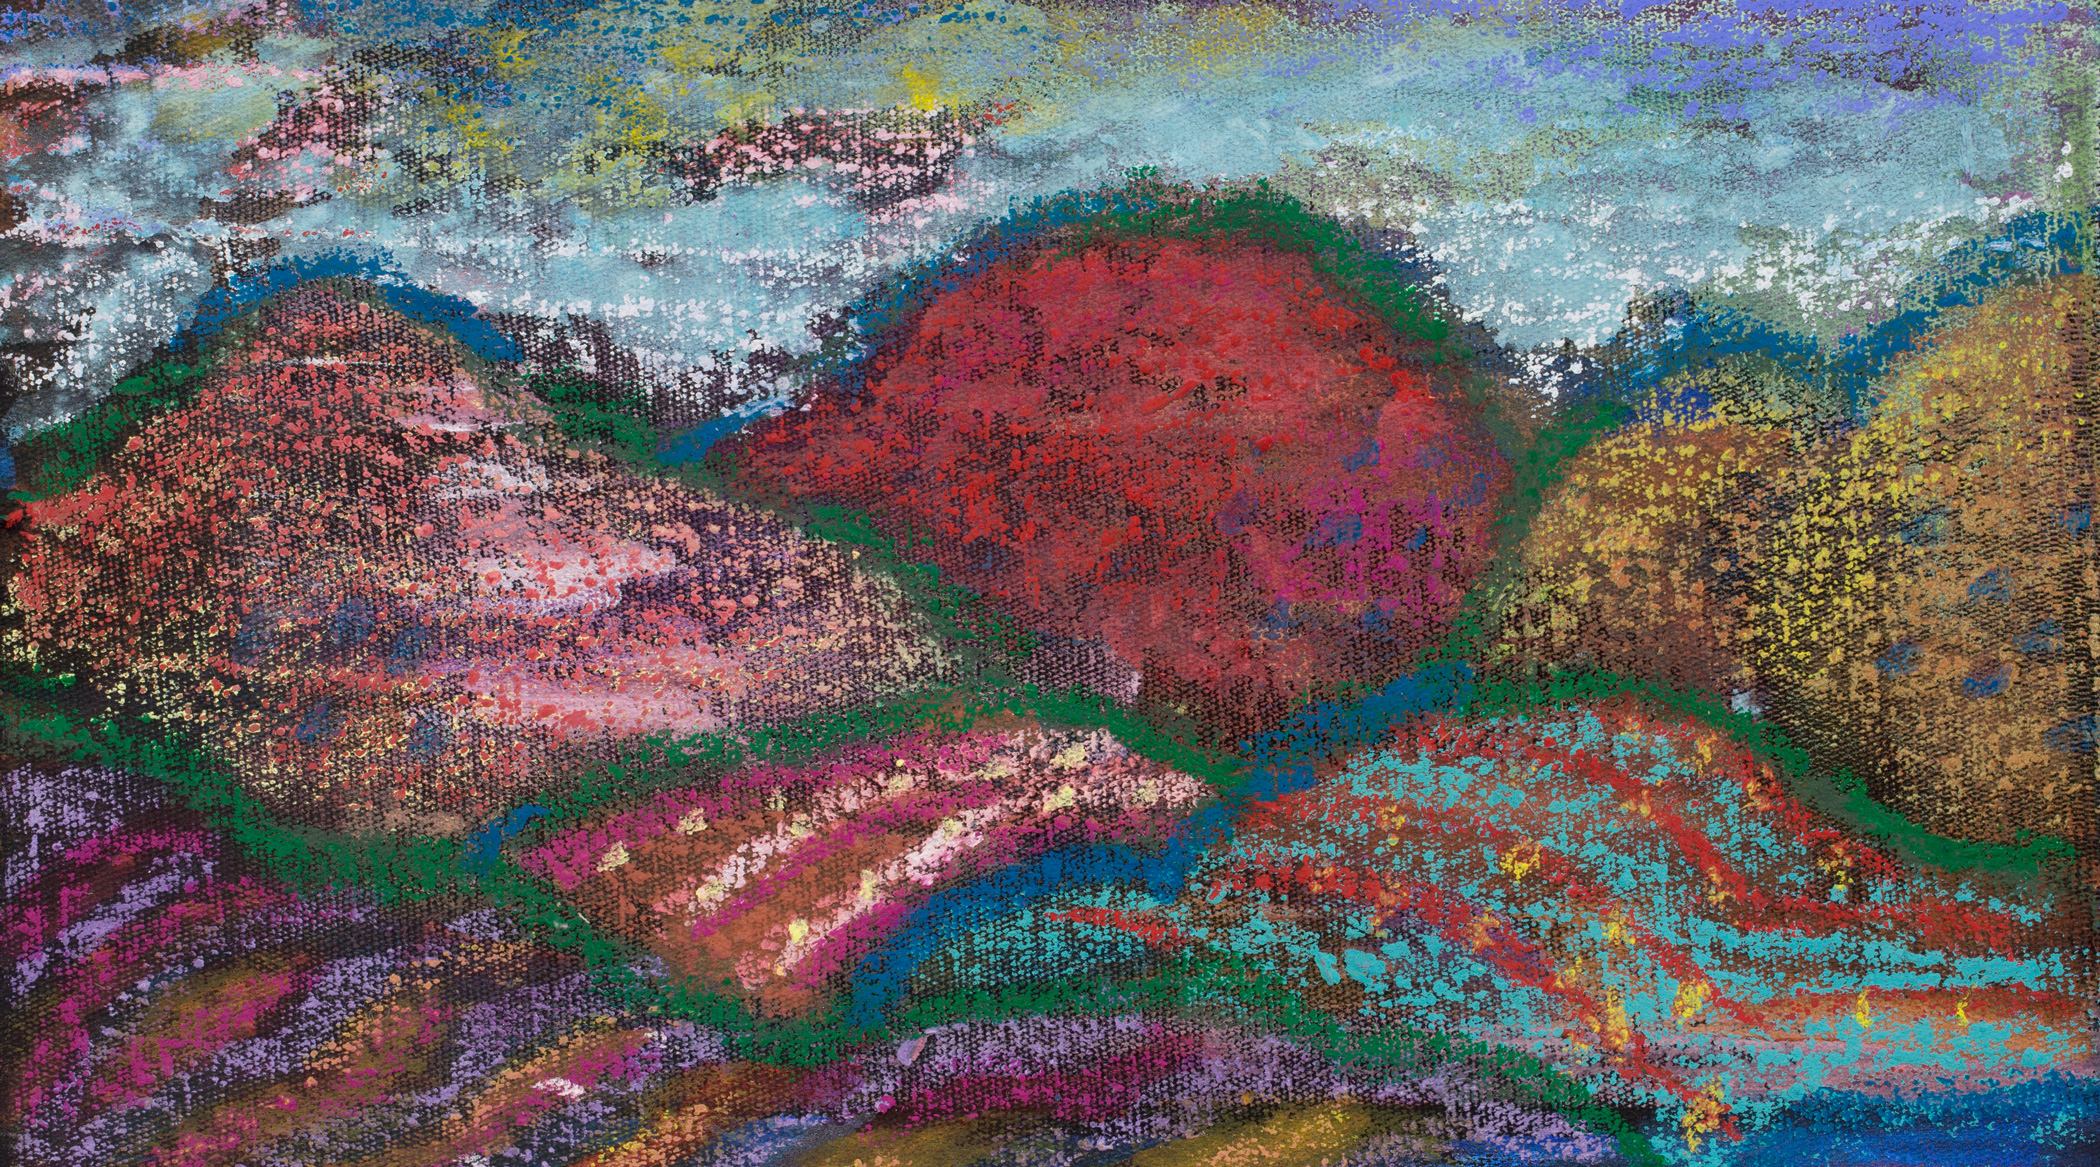 Whimsical Landscape with Red Hill